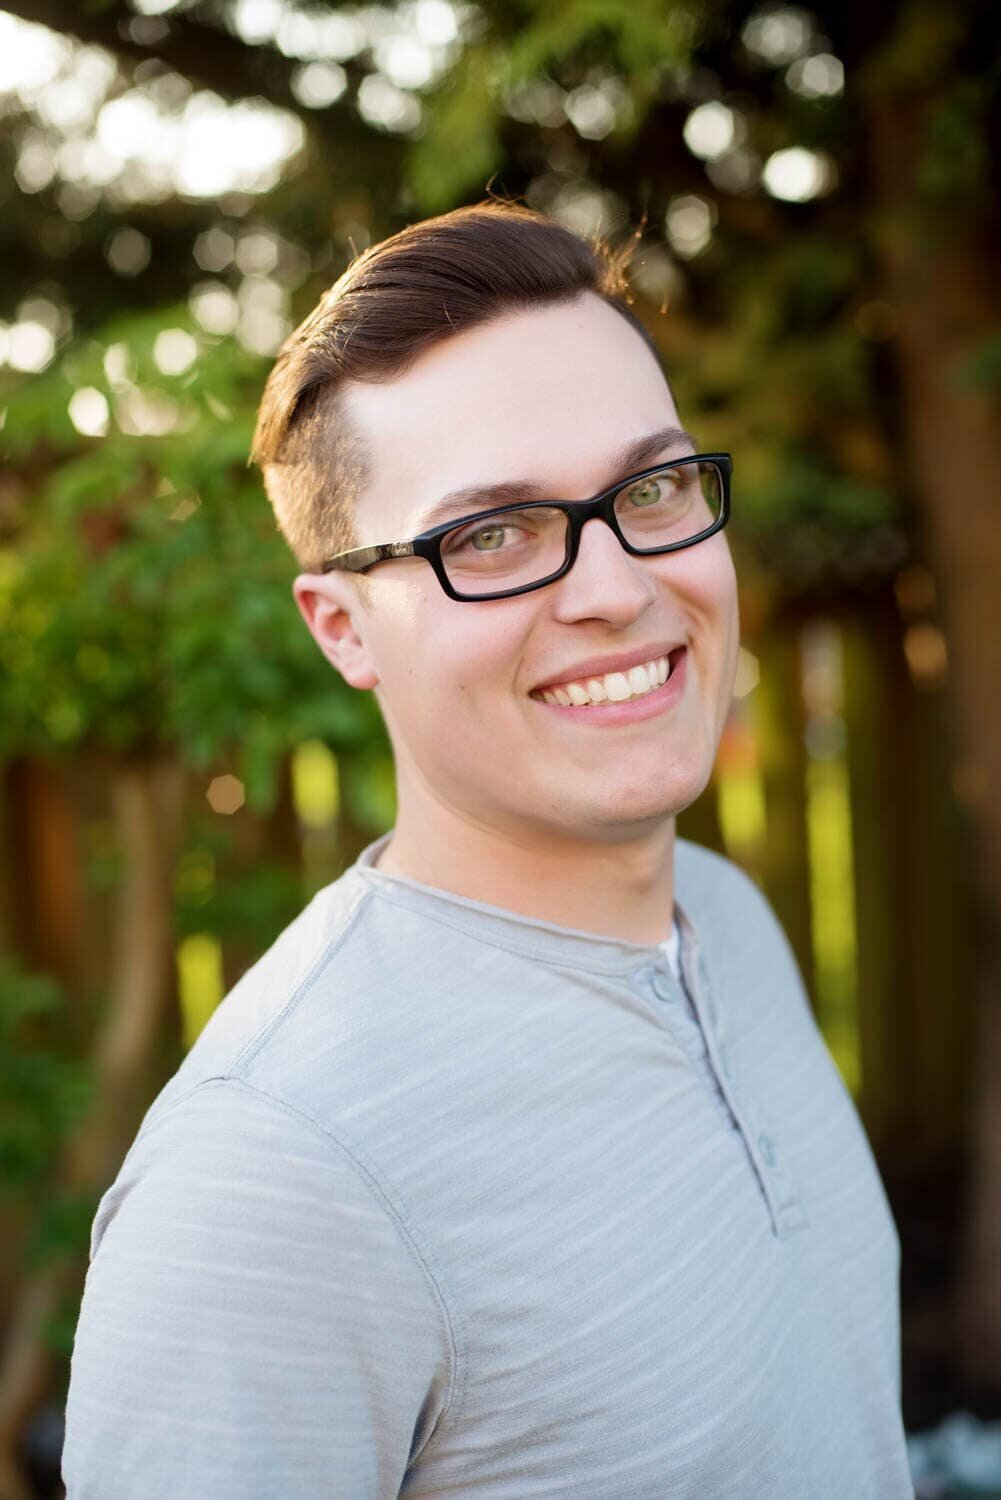 Young man with glasses smiles while outside!